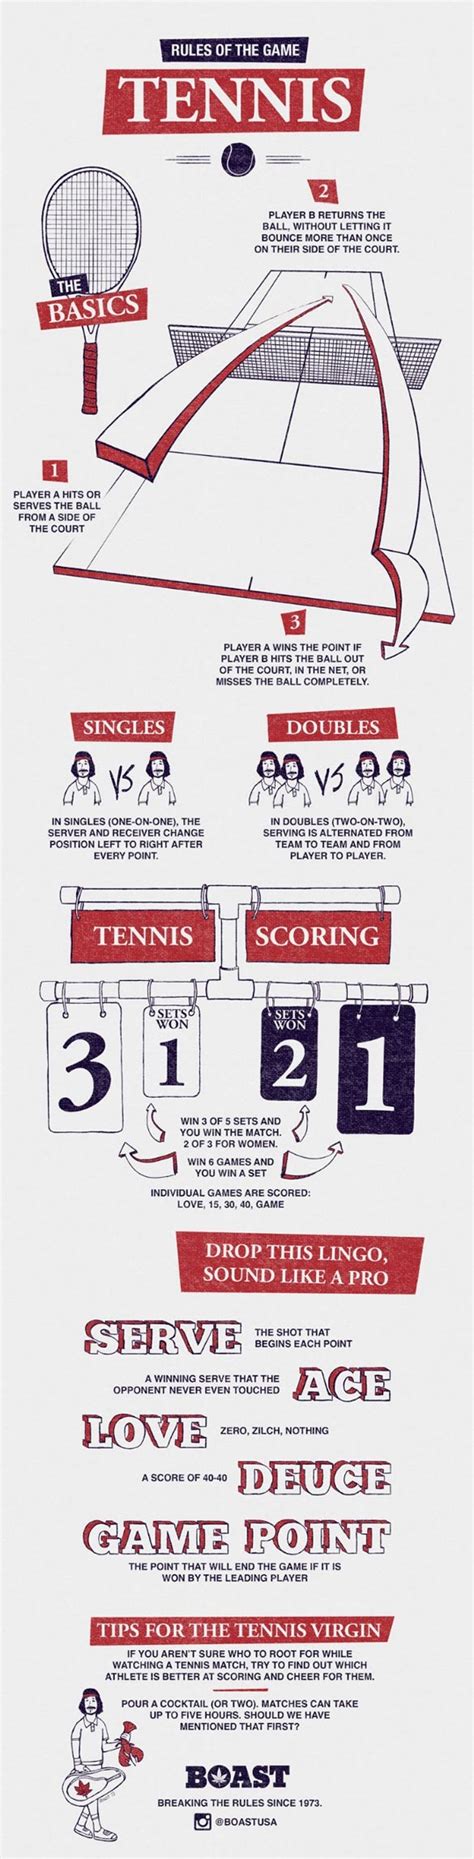 Table tennis can be played in either a singles or doubles format and involves using a small round scoring. Tennis Rules: How to Keep Score and Play